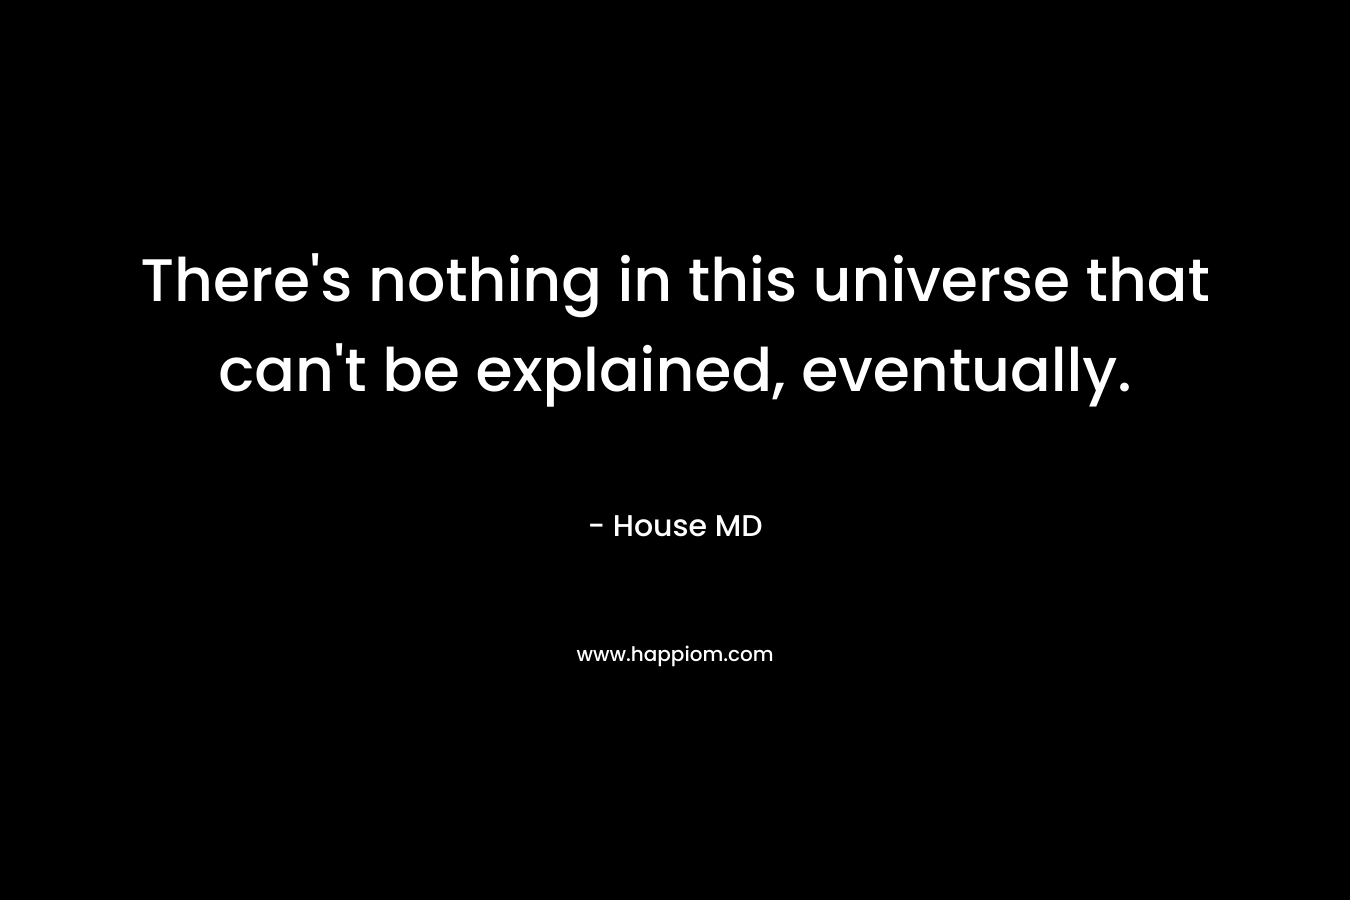 There's nothing in this universe that can't be explained, eventually.